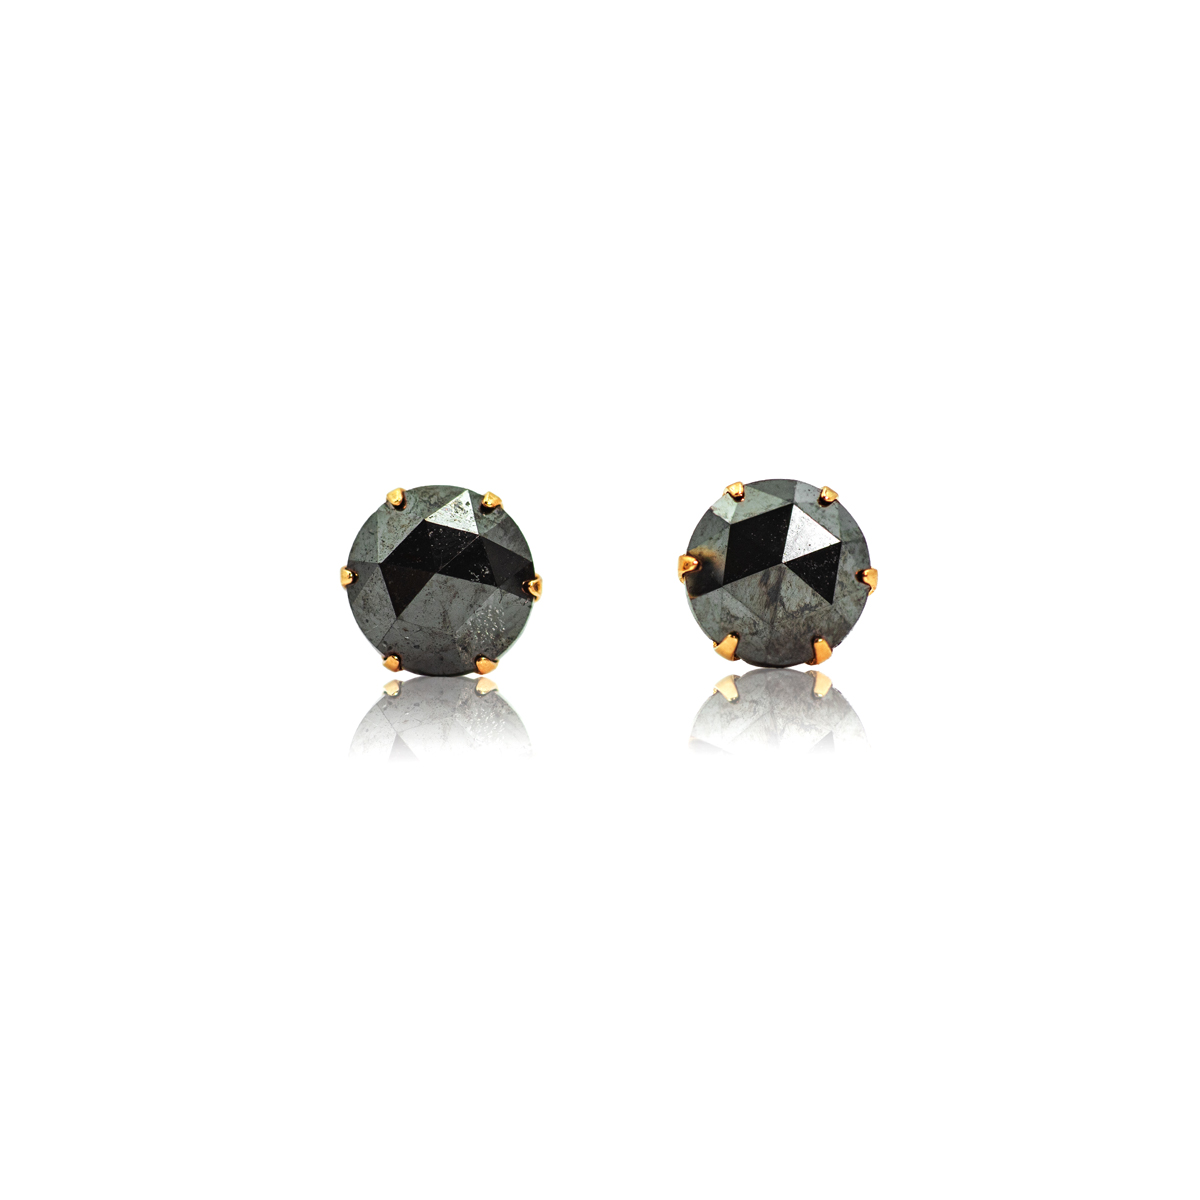 Round Shaped Stud Earrings in 18k Yellow Gold with Black Diamond